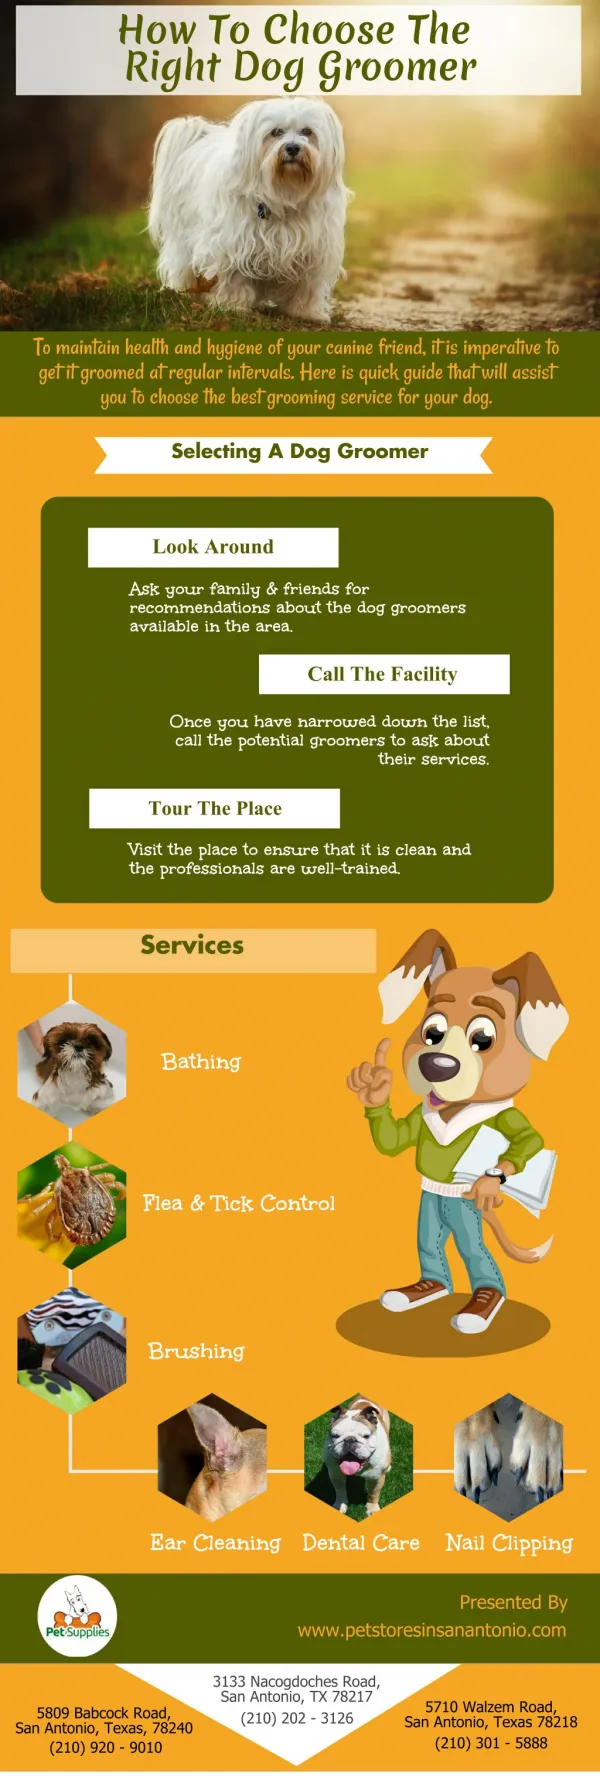 How To Choose The Right Dog Groomer